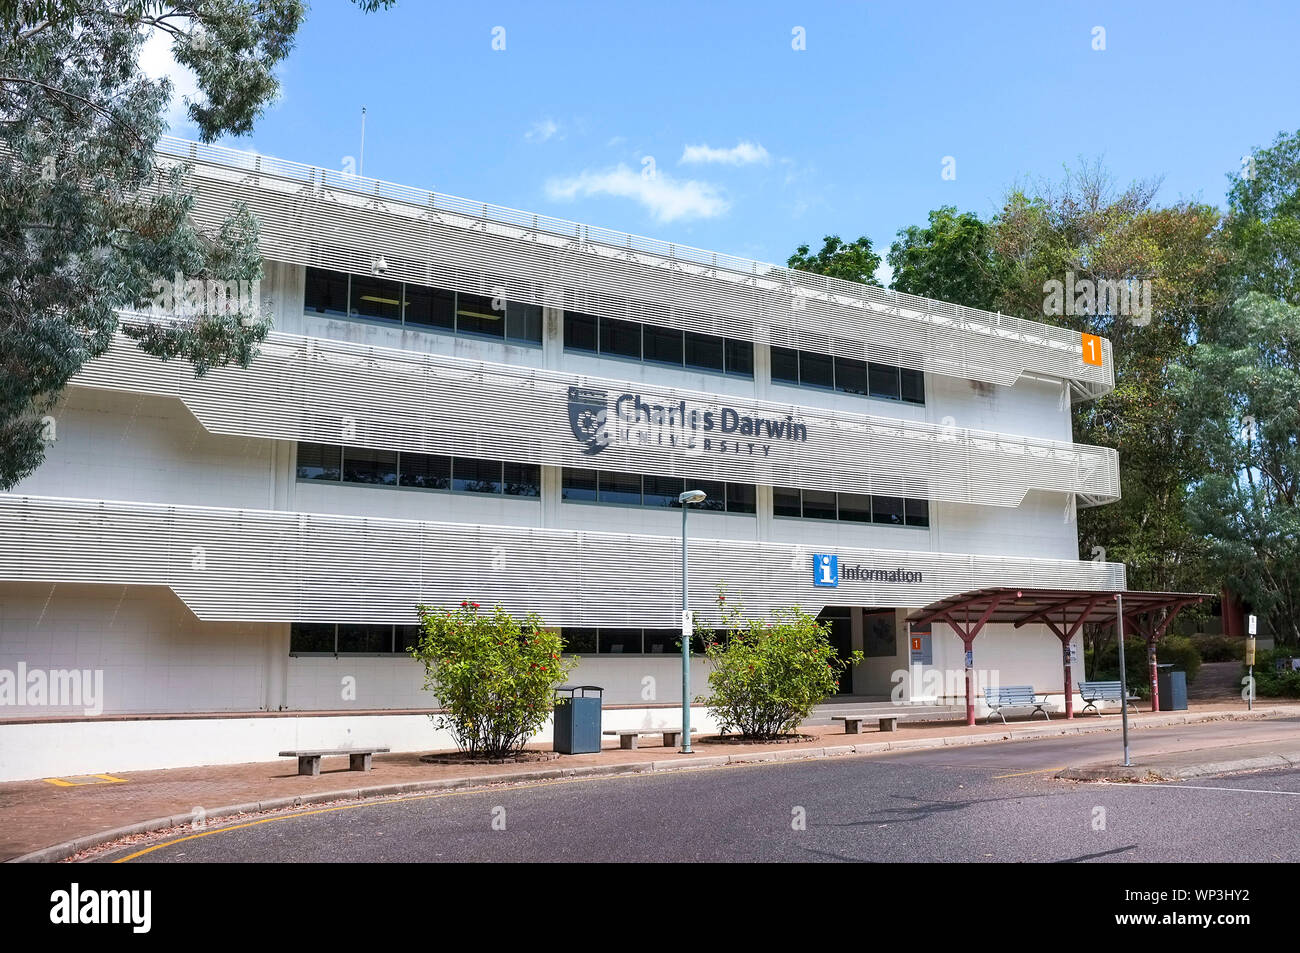 The information building at the entrance of the Charles Darwin University, in Darwin, Northern Territory, Australia. Stock Photo